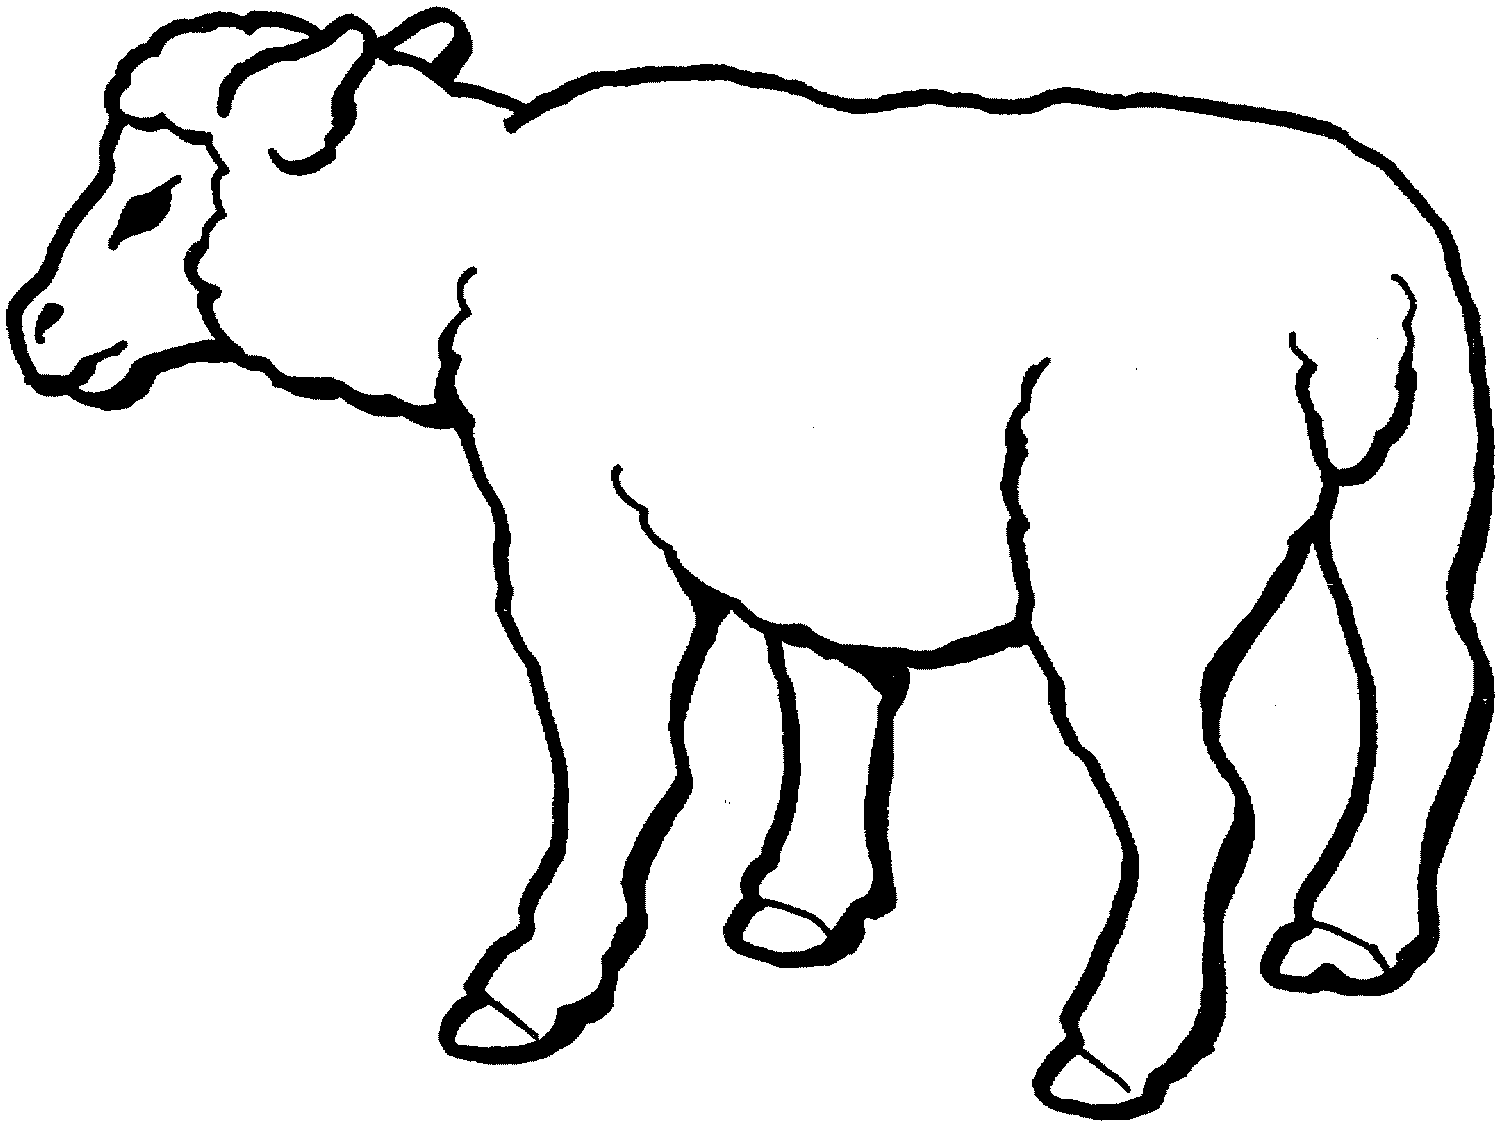 Sheep coloring pages for kids - Coloring Pages & Pictures - IMAGIXS